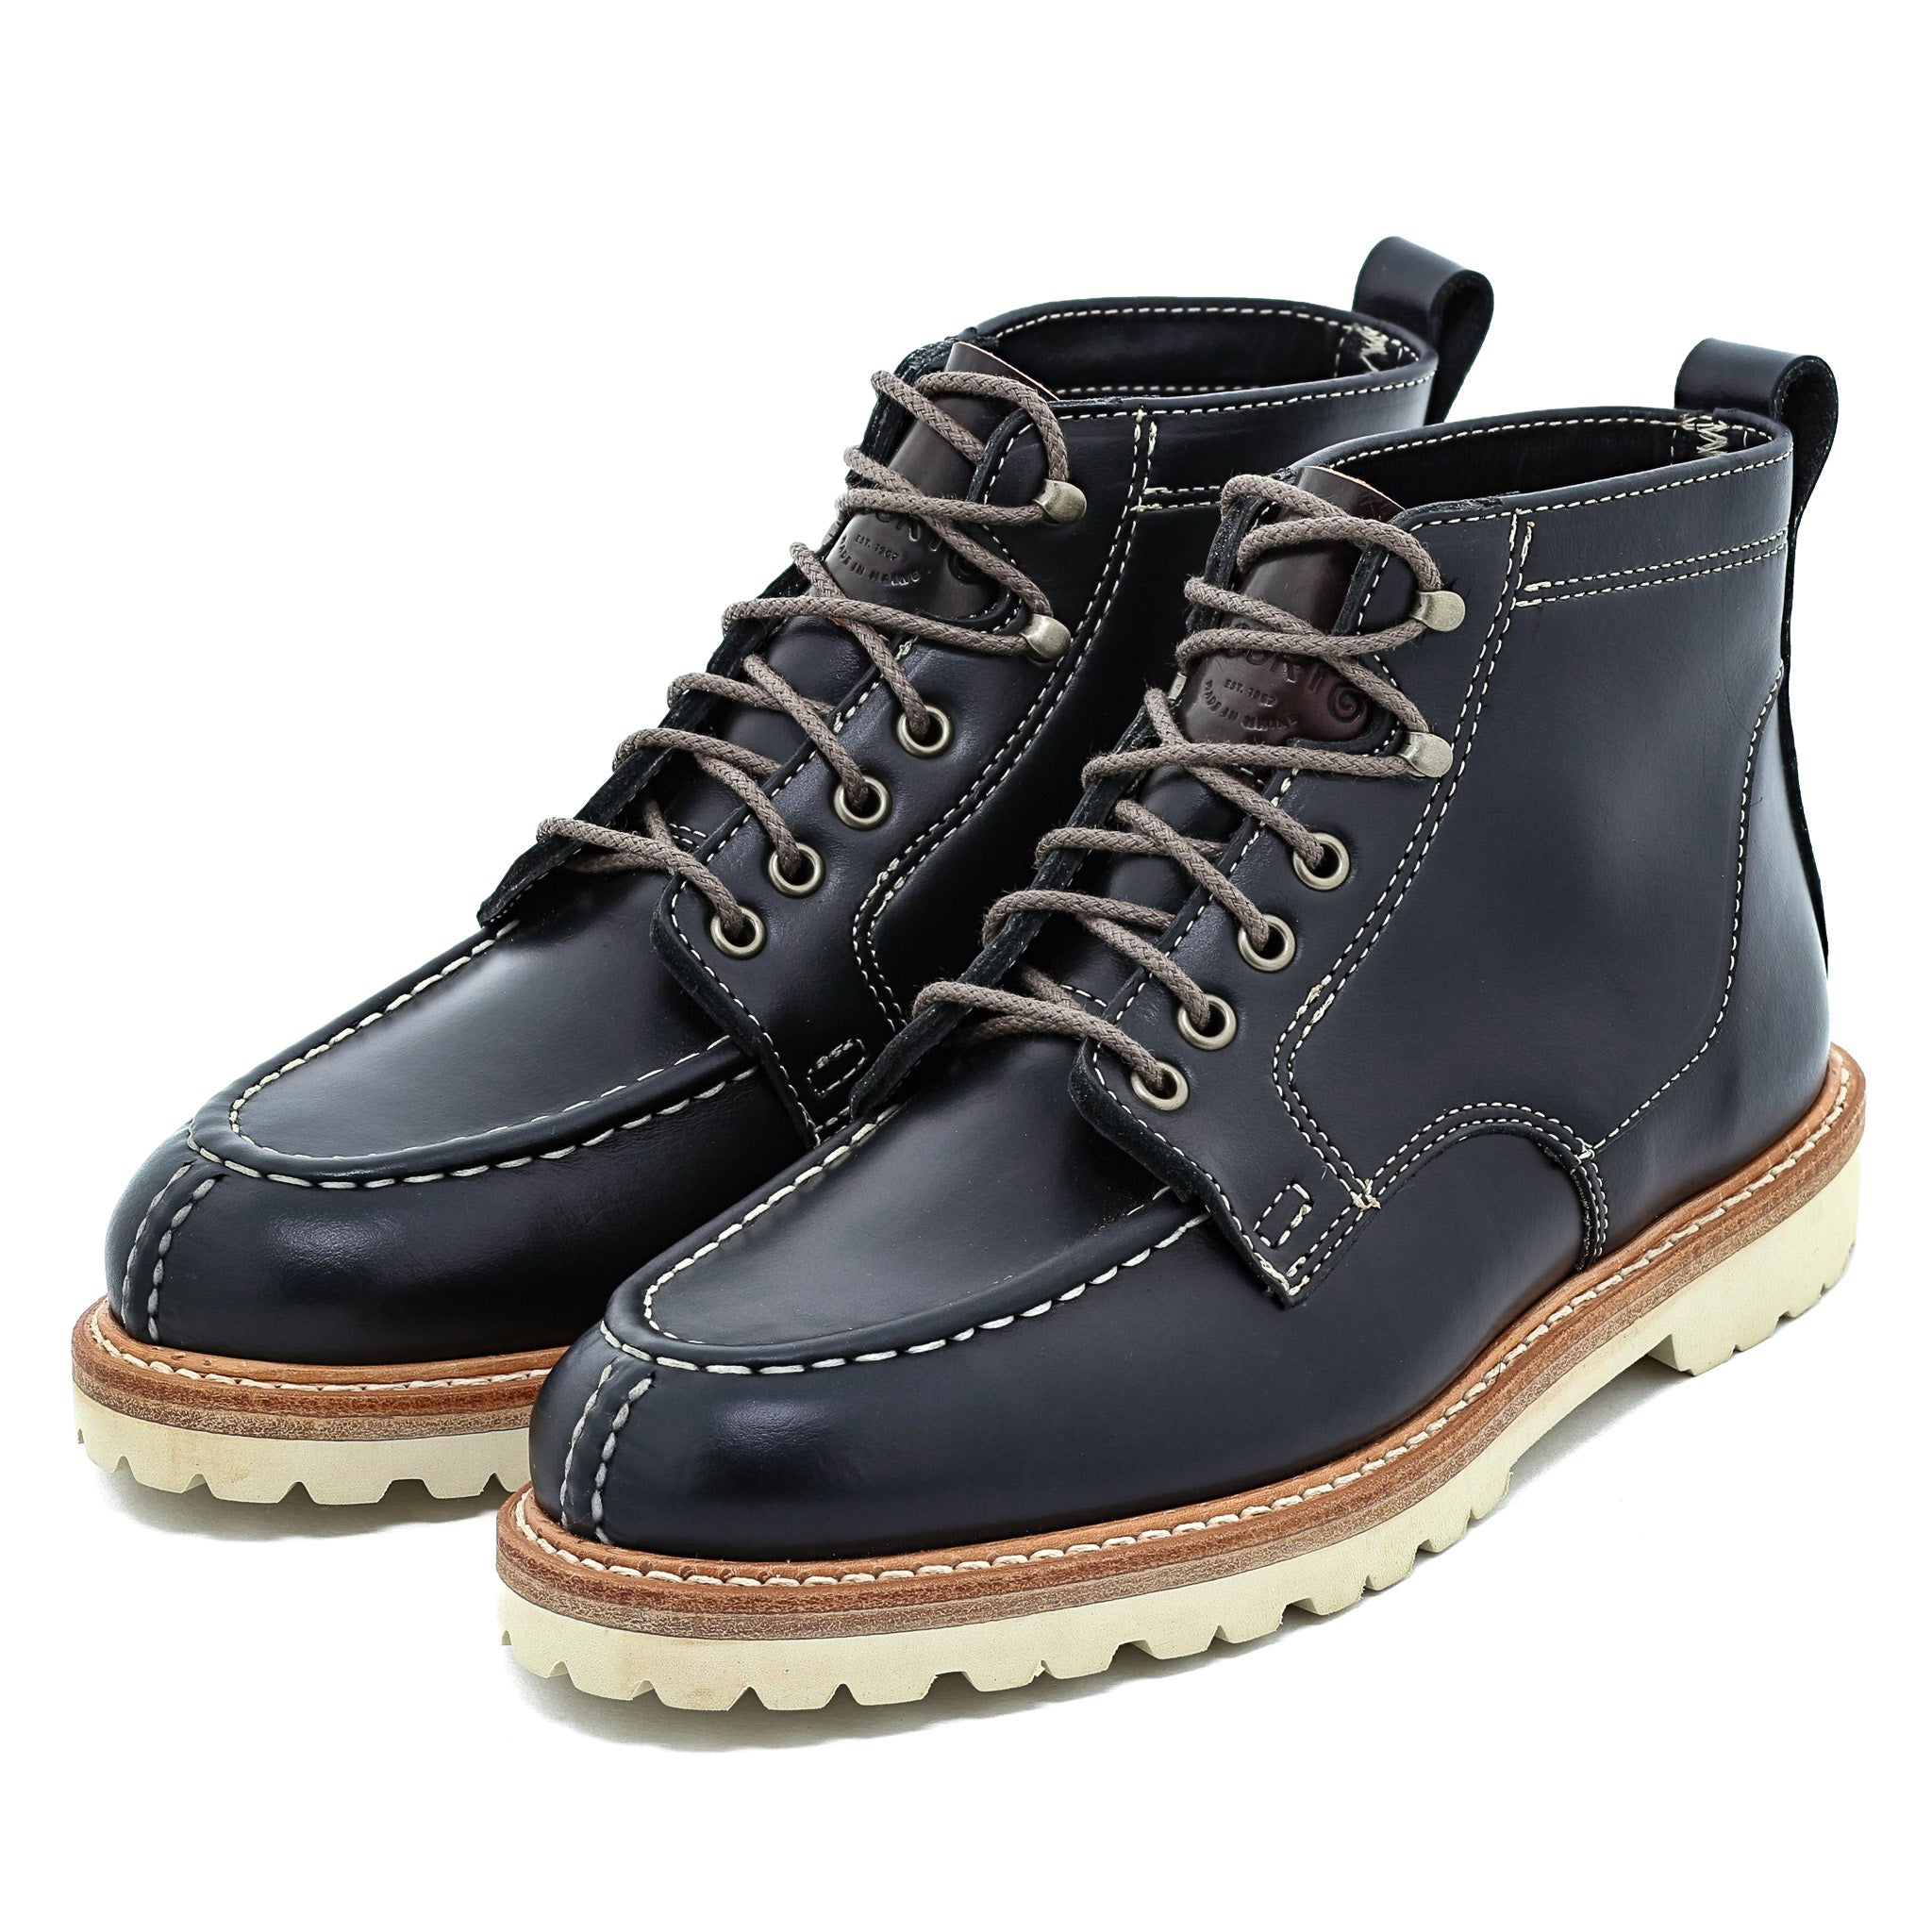 Dunnage Boot - Black Chromexcel | Rancourt & Co. | Men's Boots and Shoes